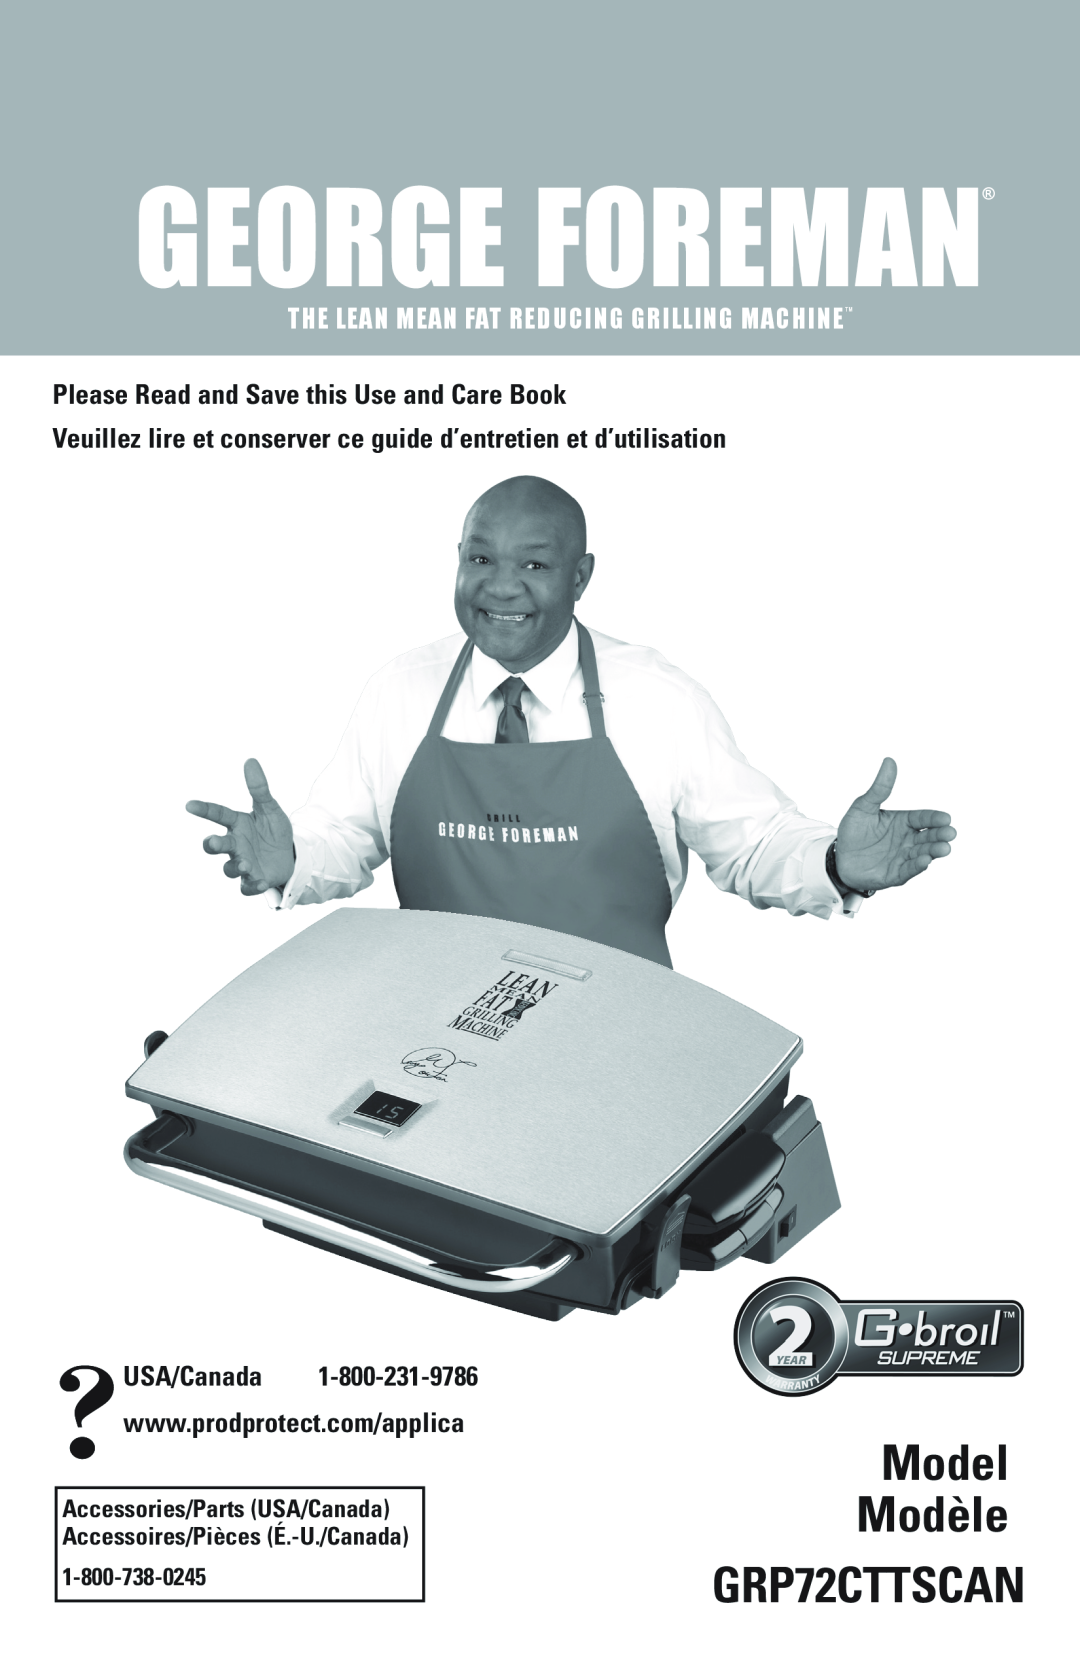 George Foreman GRP72CTTSCAN manual Model Modèle, The Lean Mean Fat Reducing Grilling Machinetm 